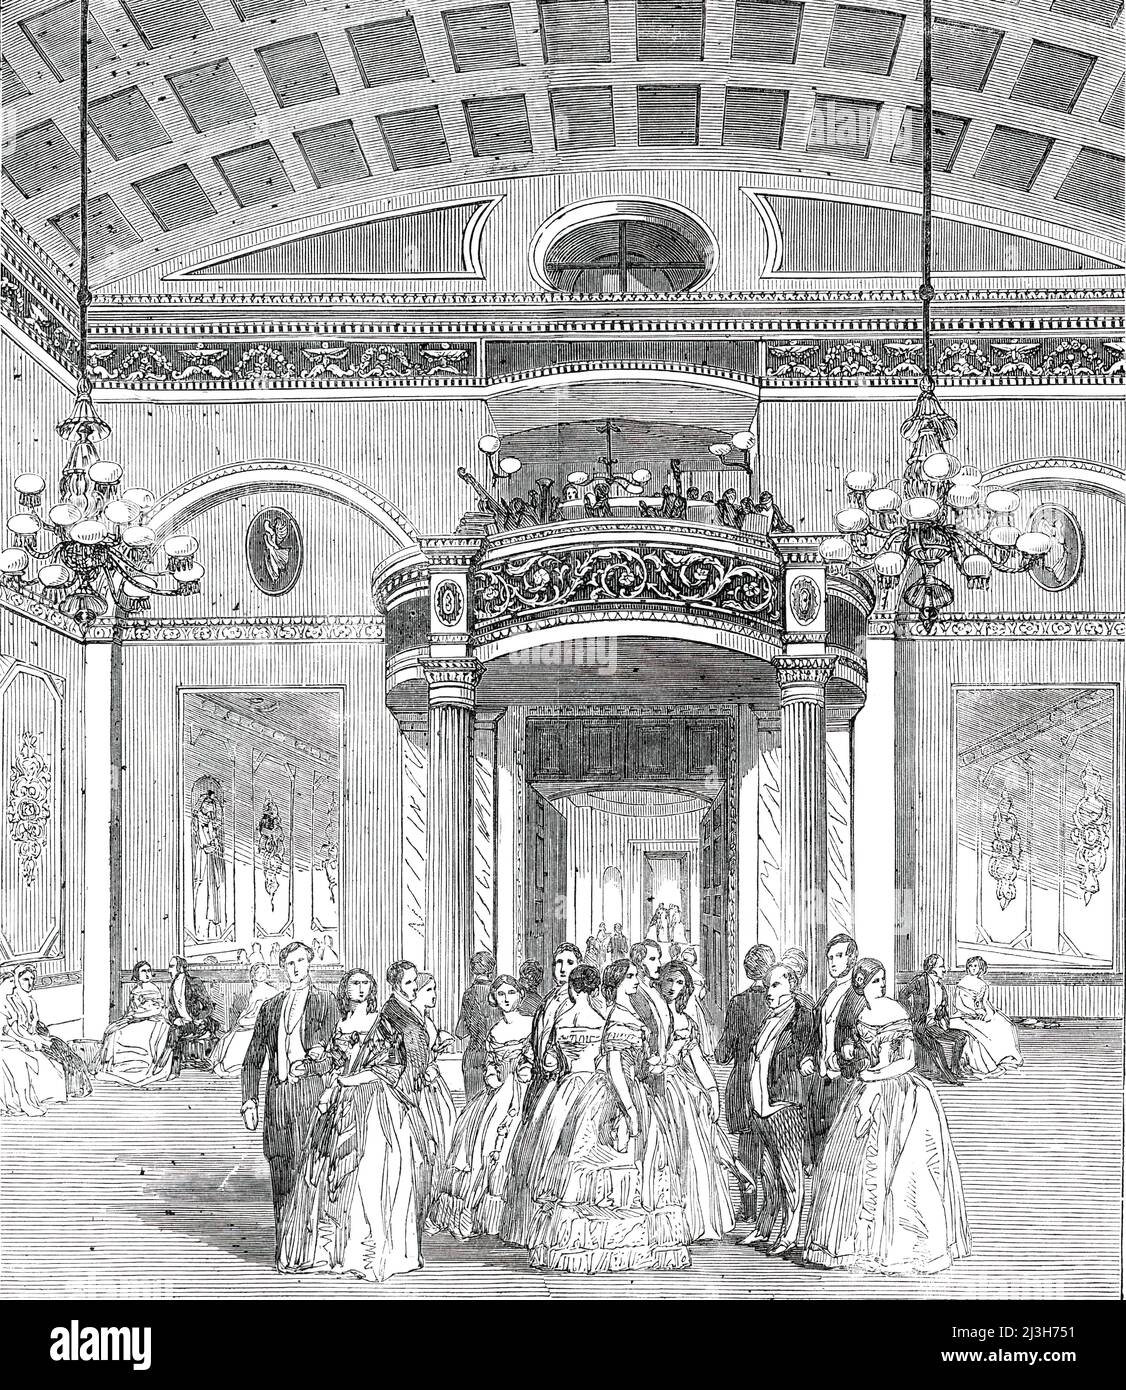 The Whittington Club - New Decoration of the Ball-Room, 1850. The Whittington in Arundel Street, London, formed in 1847, was also a literary institute. 'The splendid ball-room of this Institution has been re-decorated and refitted with great splendour, at a cost of &#xa3;600, the entire amount having been subscribed by the members previous to the commencement of the works...In addition to the decorations, a new orchestra has been erected, which, supported by two graceful and appropriate fluted columns, is cleverly blended with the general character and style of the room, and forms a useful as Stock Photo